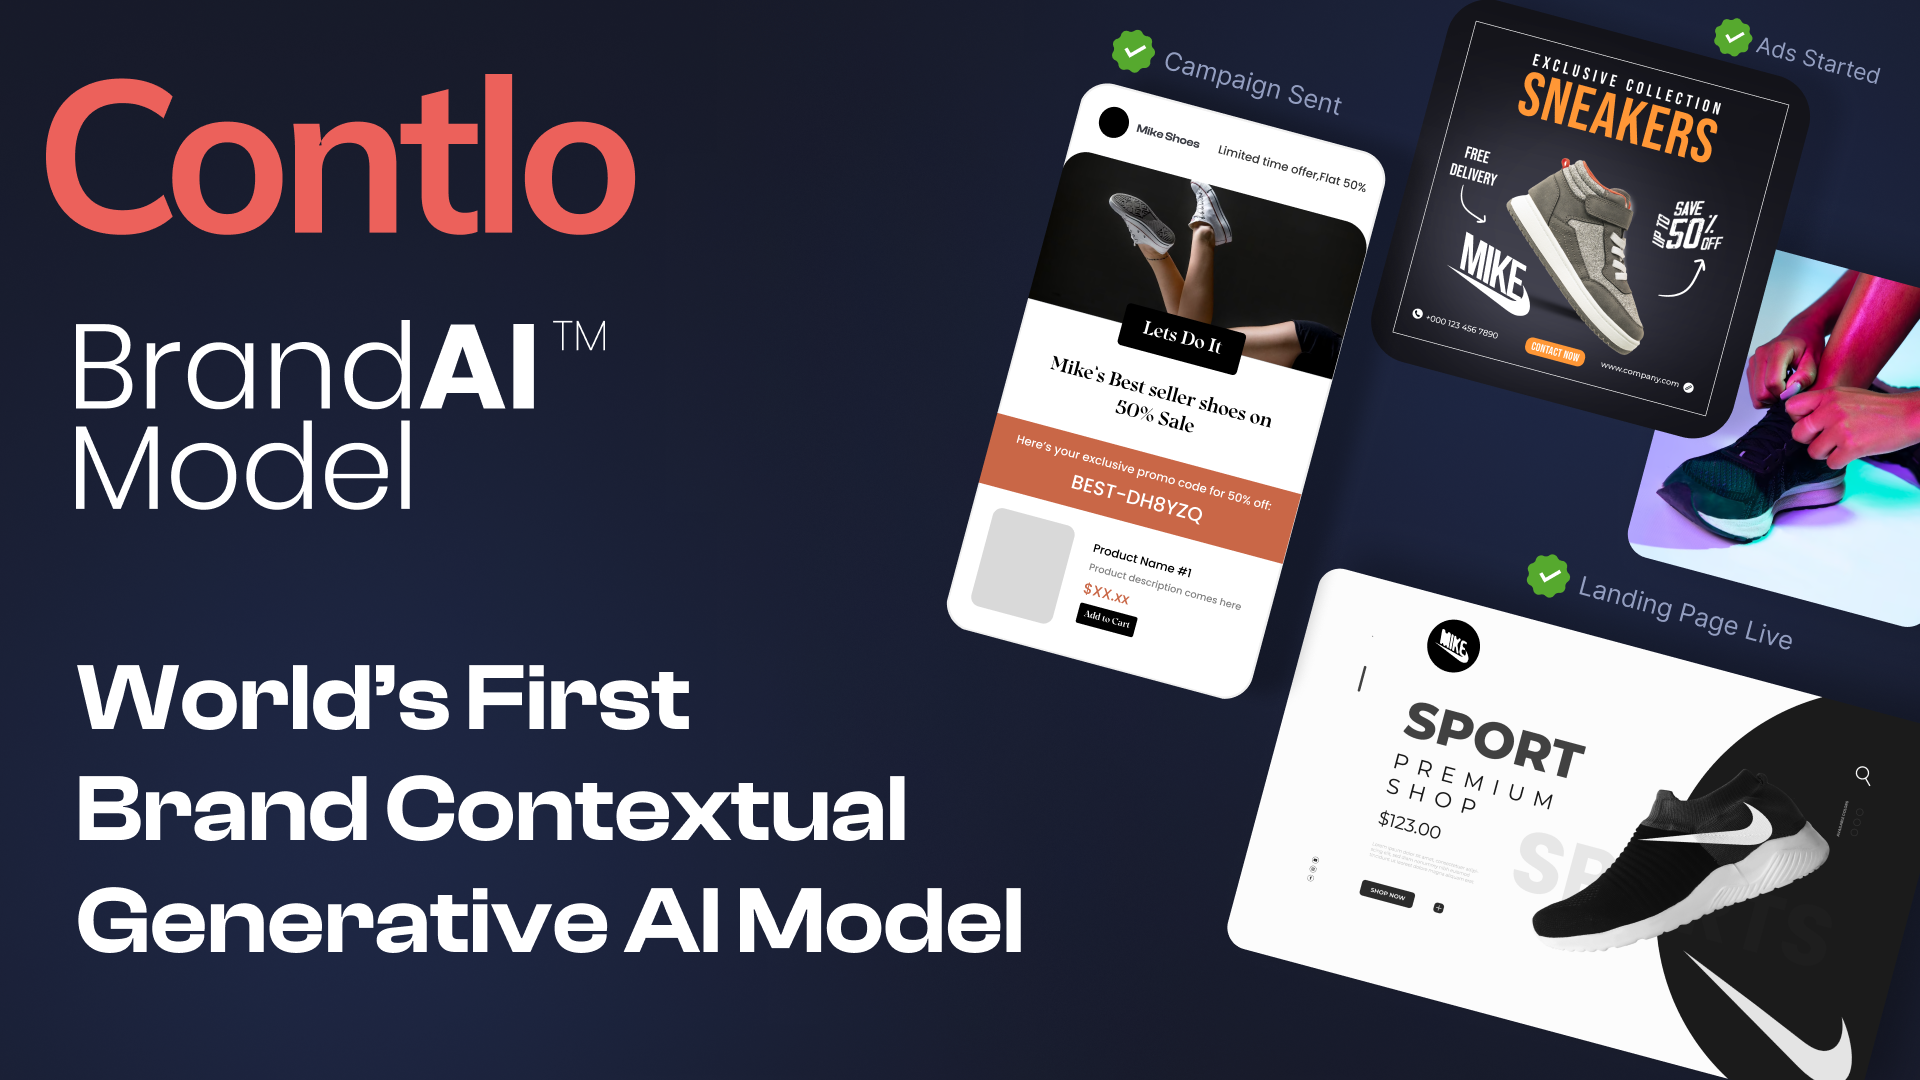 product-update: ⚡️Introducing Brand AI Model™⚡️ – World’s First Brand Contextual Generative AI Model ⚡️